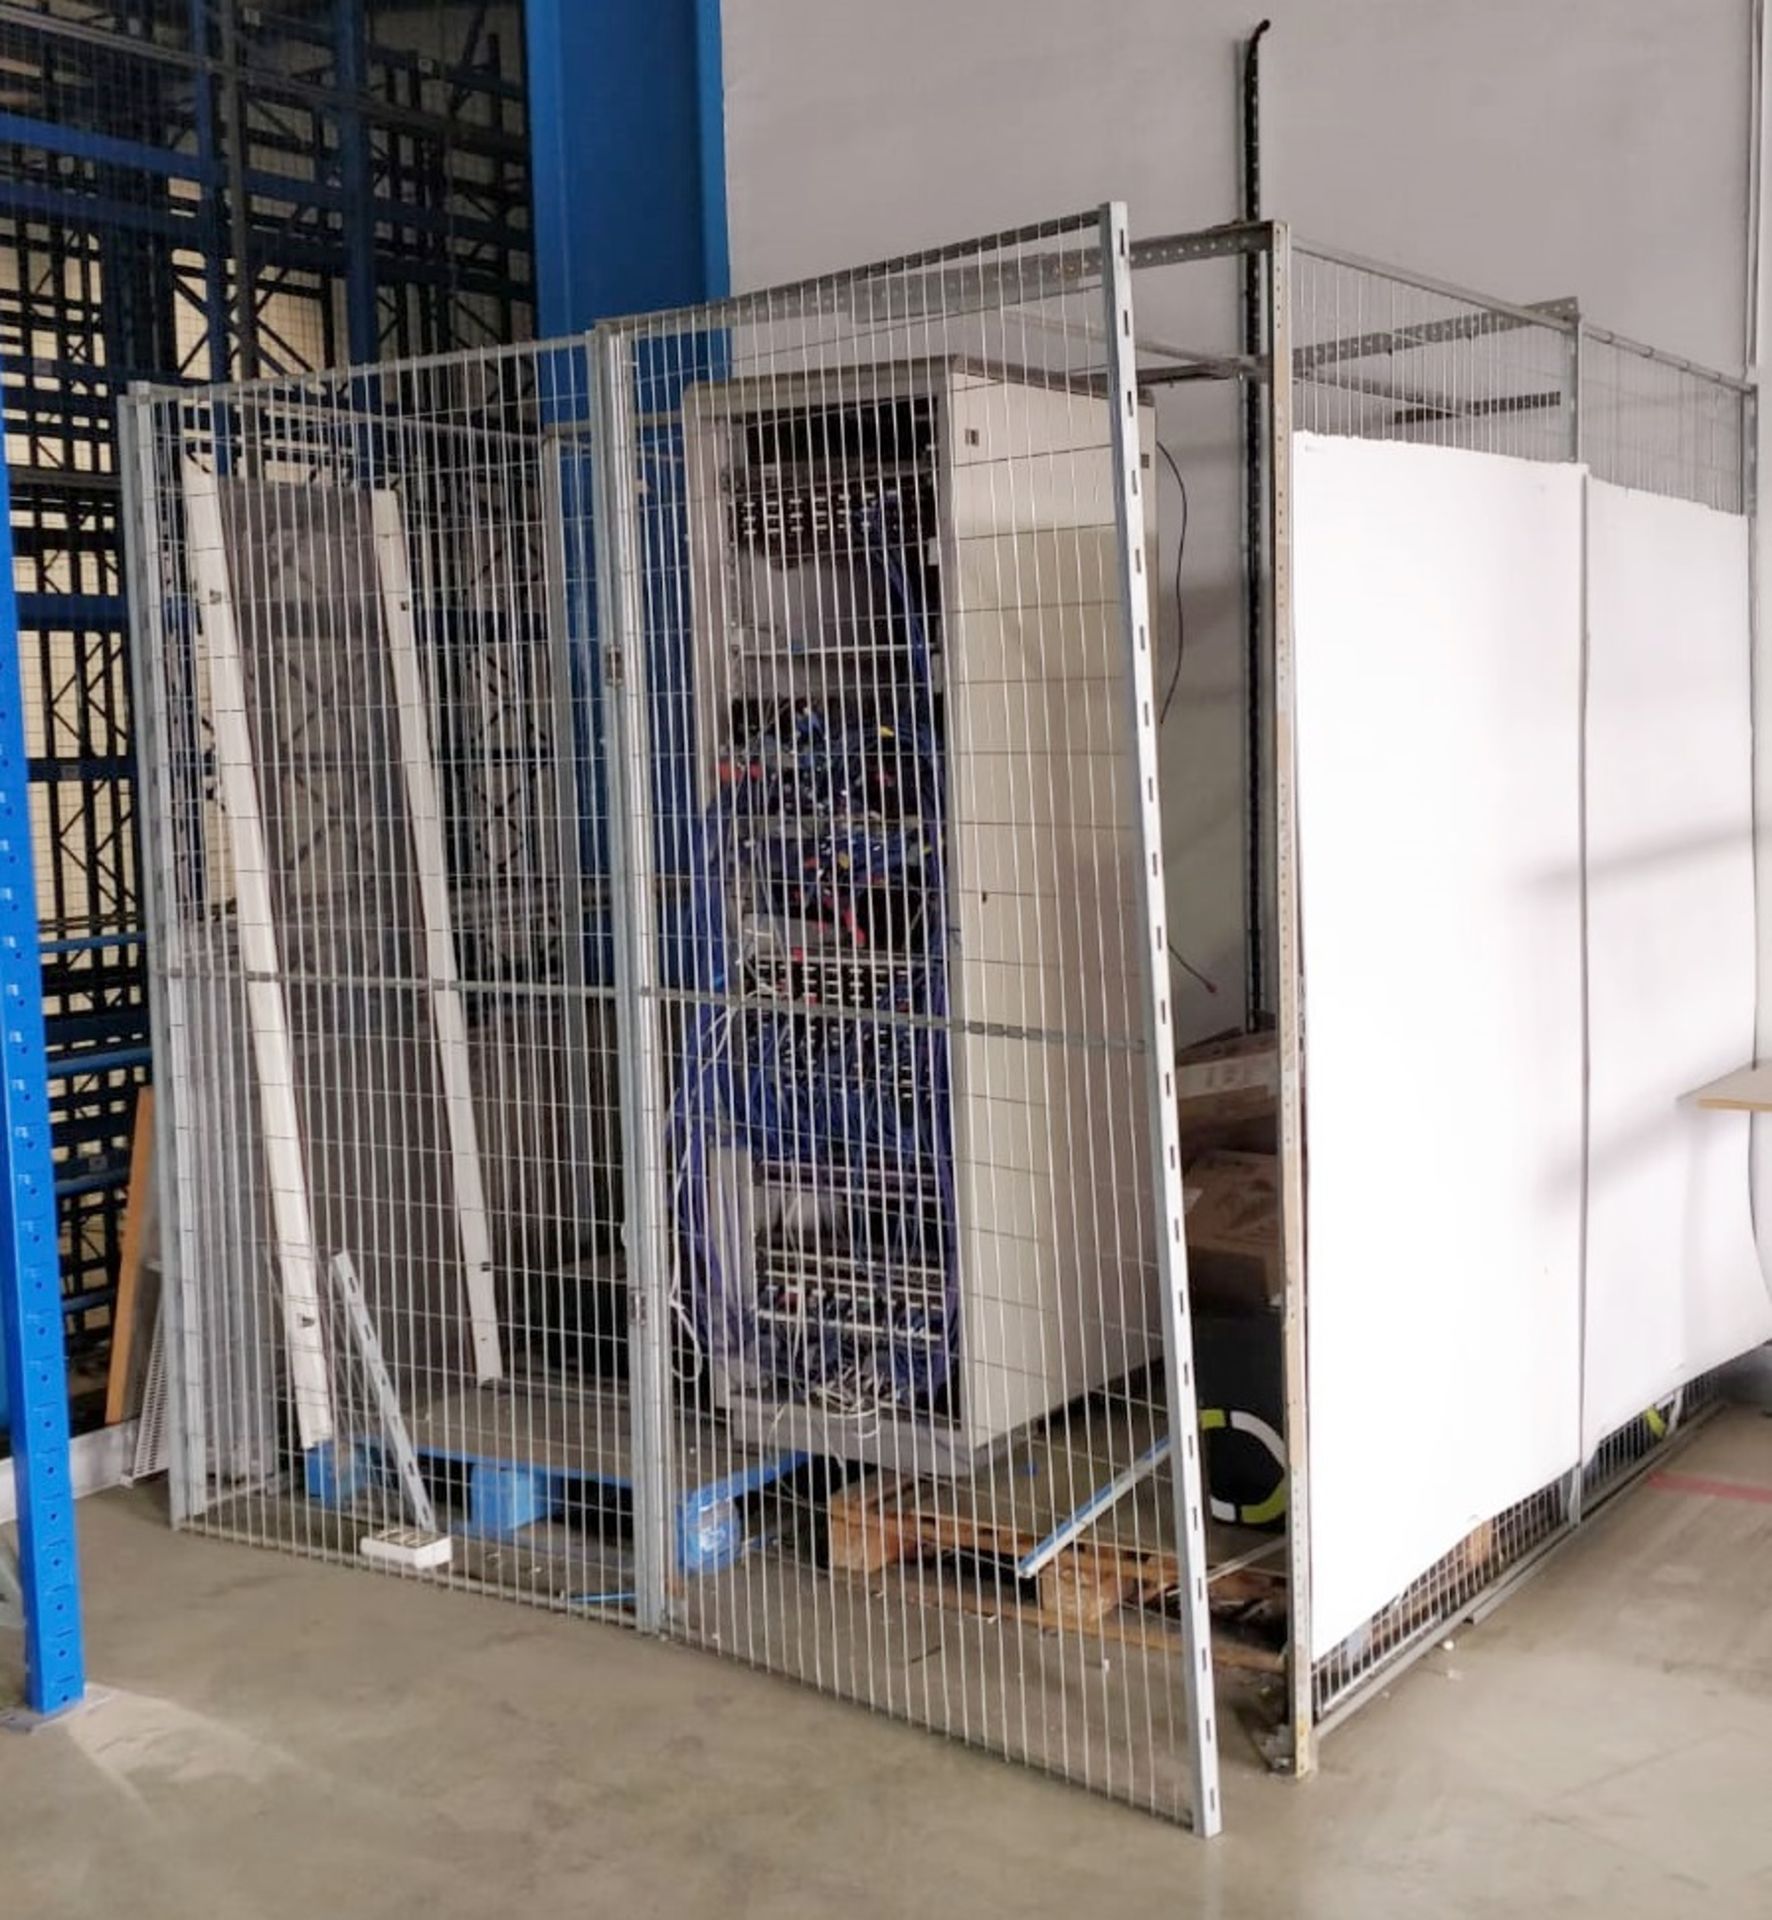 1 x Metal Security Storage Cage Enclosure With Door - Dimensions: W240 x D240 x H220cm Comes With